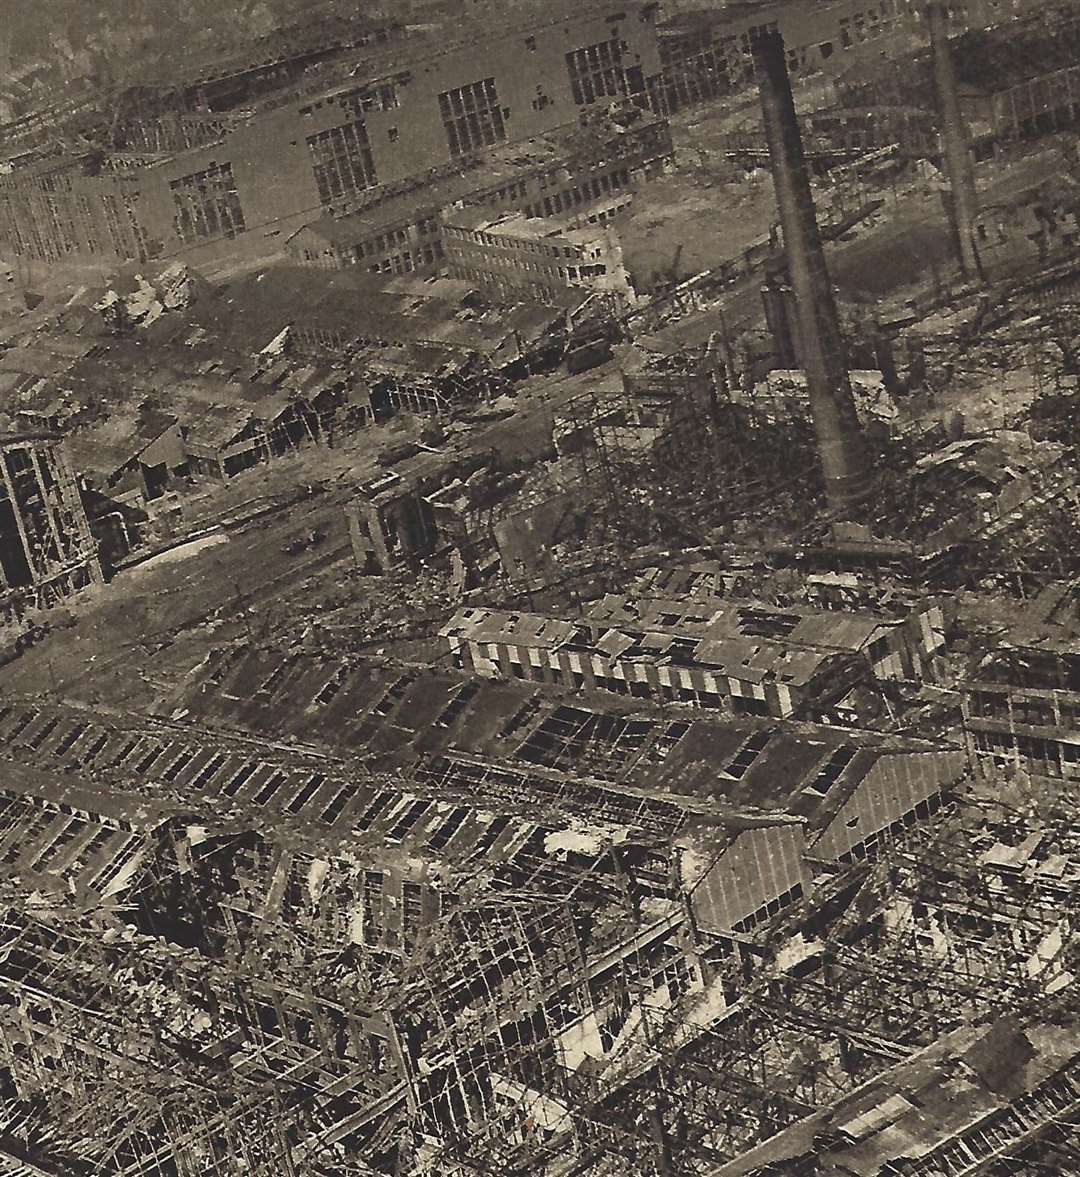 The Krupps armament factory at Essen after targetted bombing by Bomber Command